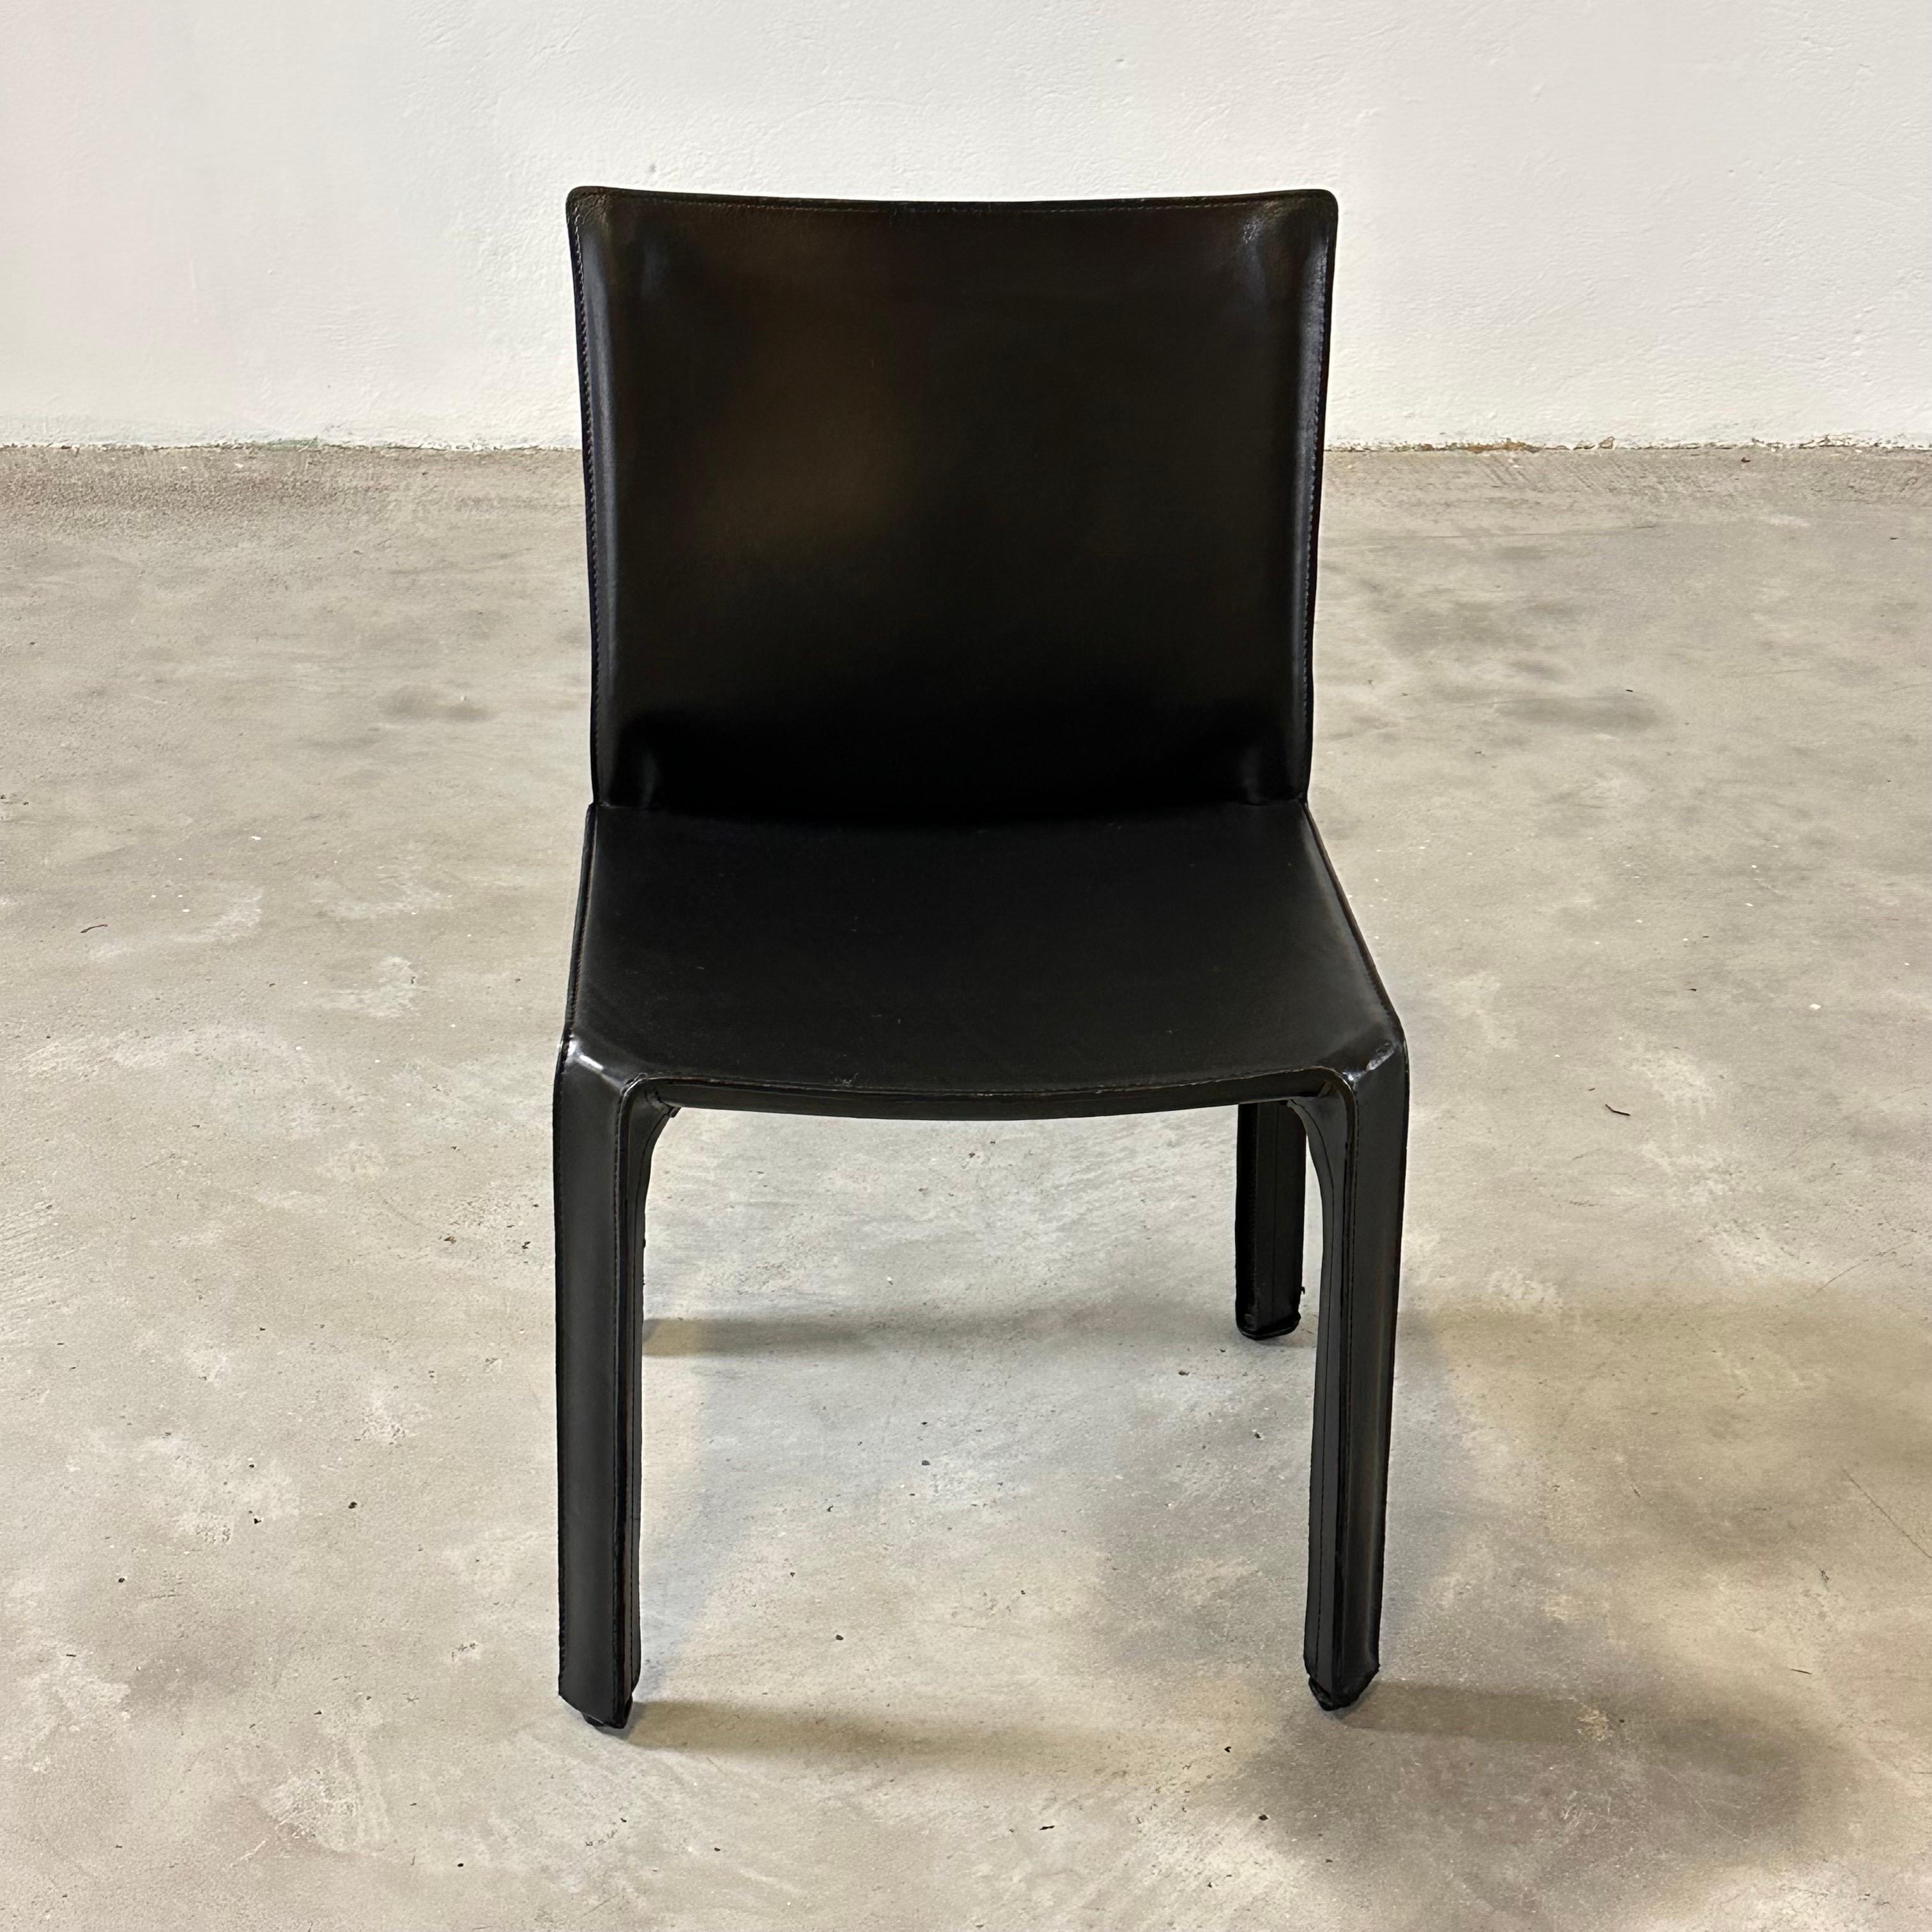 Set of Six CAB 412 Chairs by Mario Bellini for Cassina in Black Leather, 1970s For Sale 5